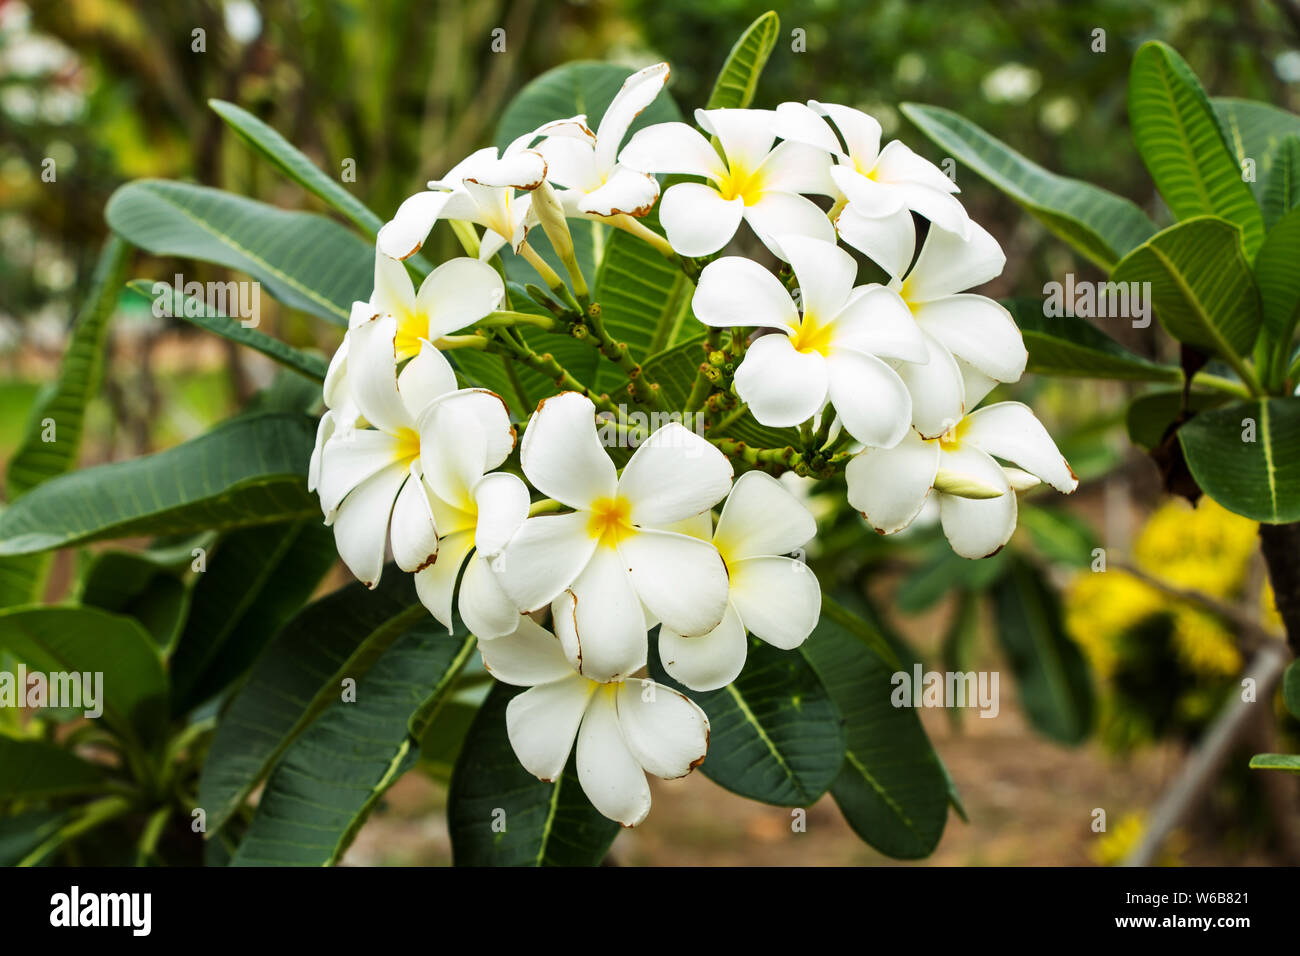 Plumaria flowers and green leaf Stock Photo